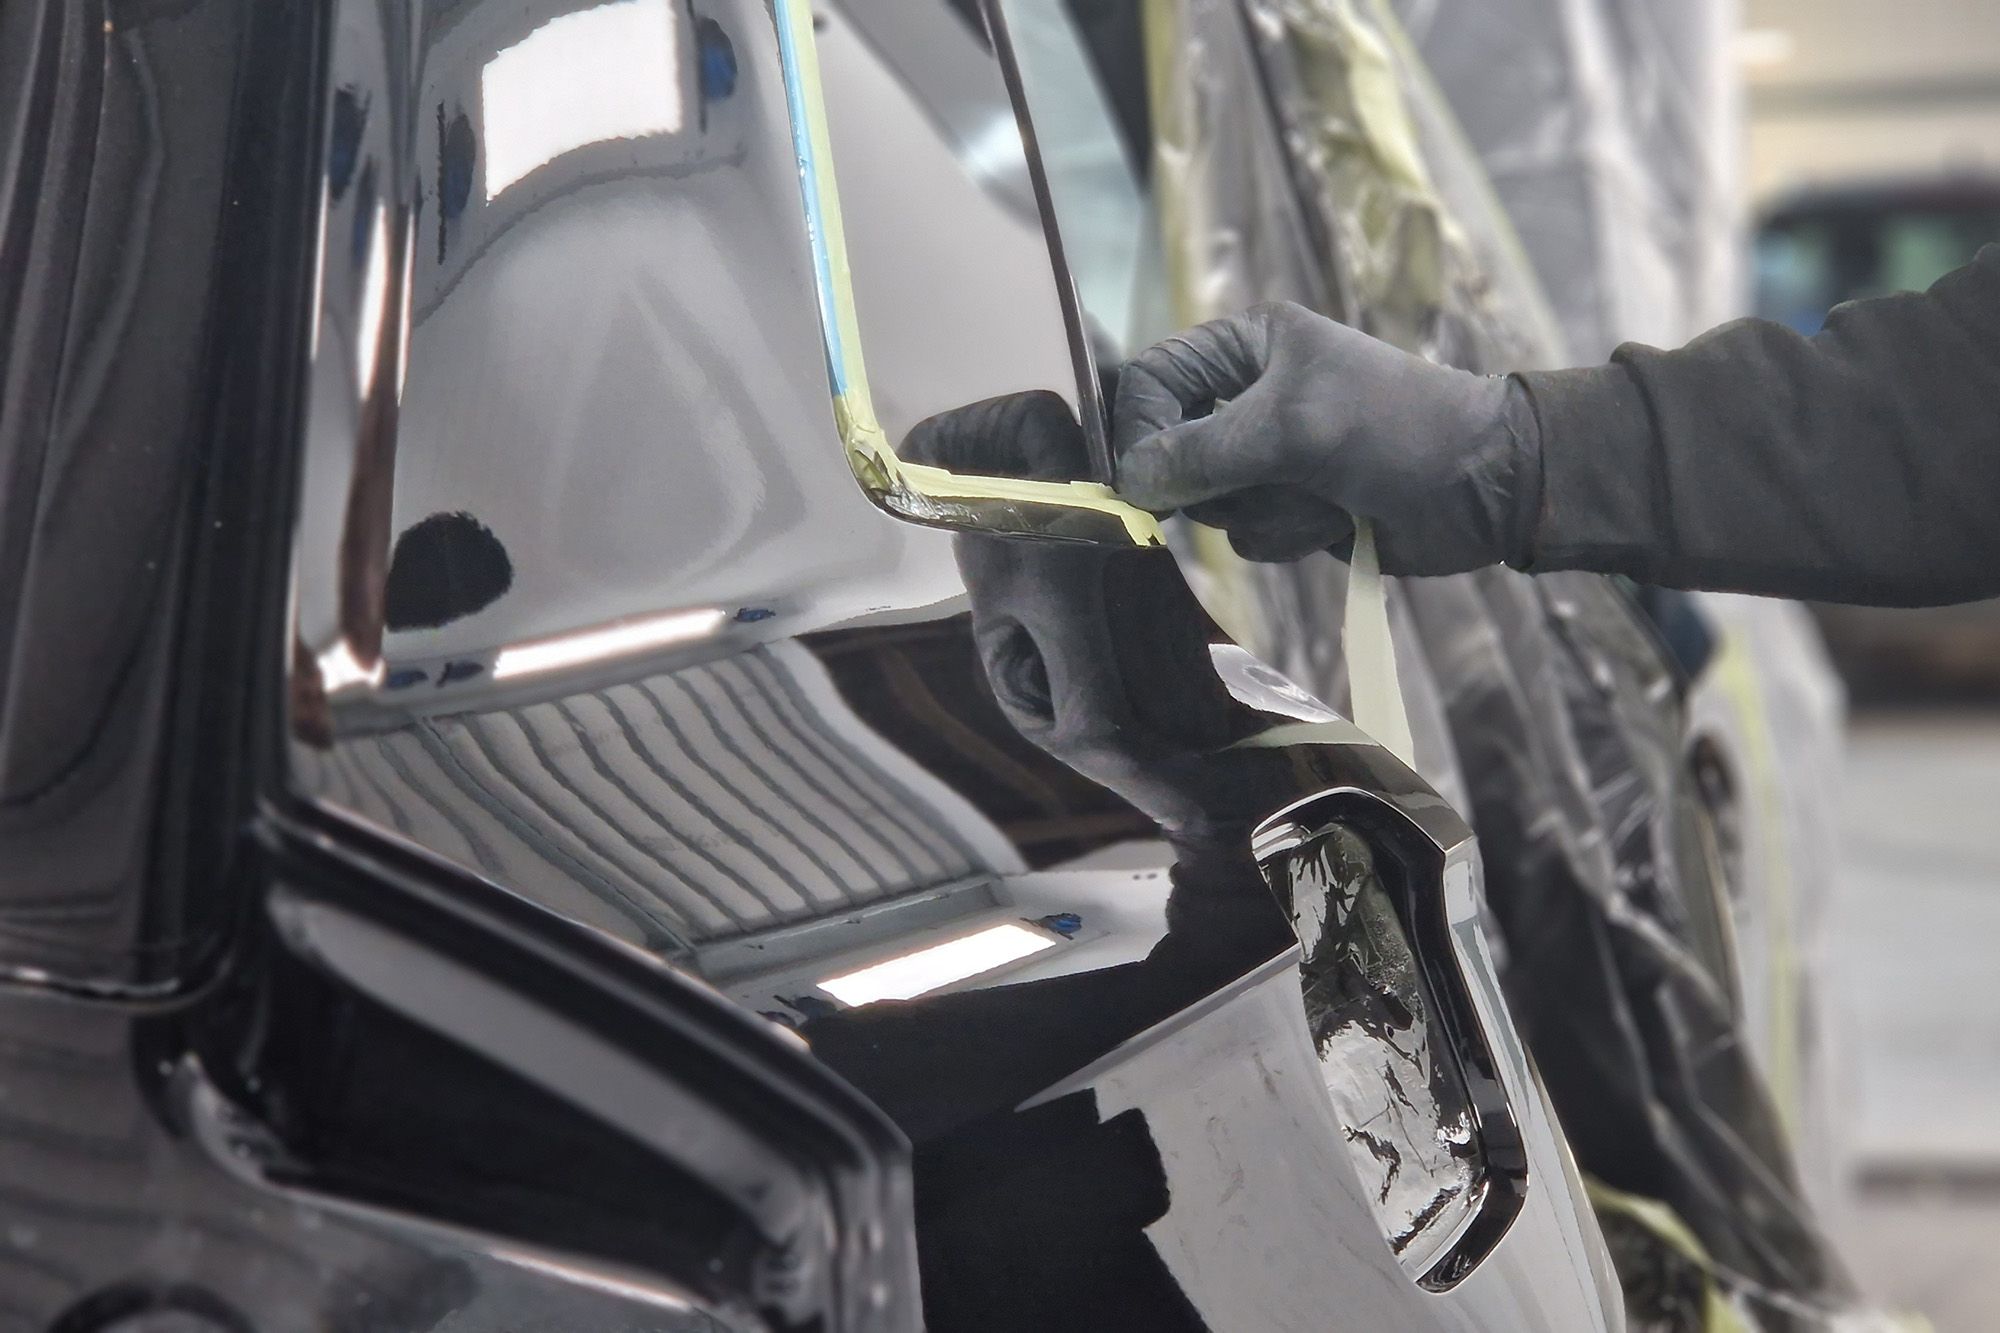 Removing masking tape from a freshly painted Land Rover